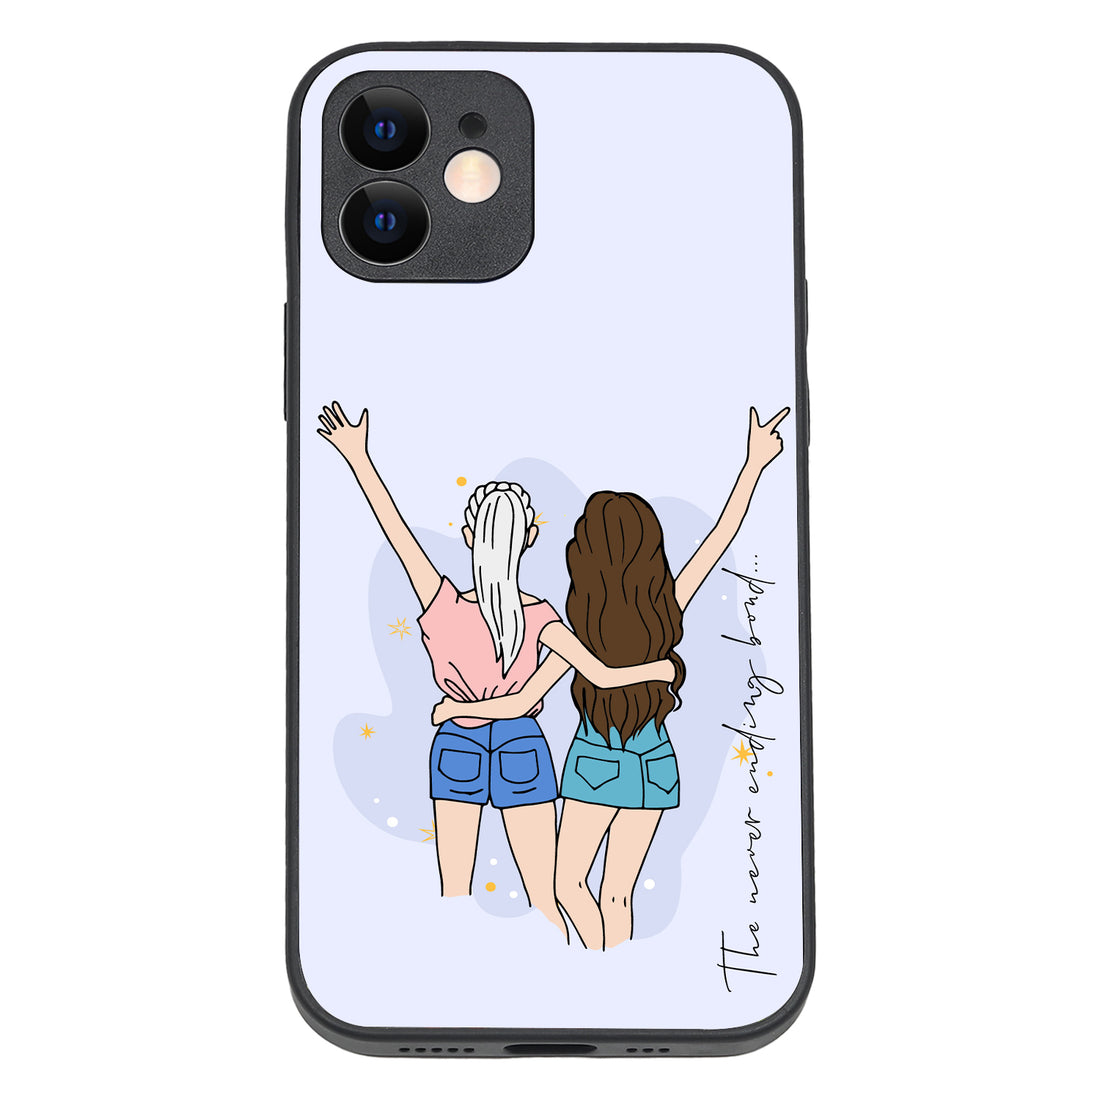 Girl Bff iPhone 12 Case